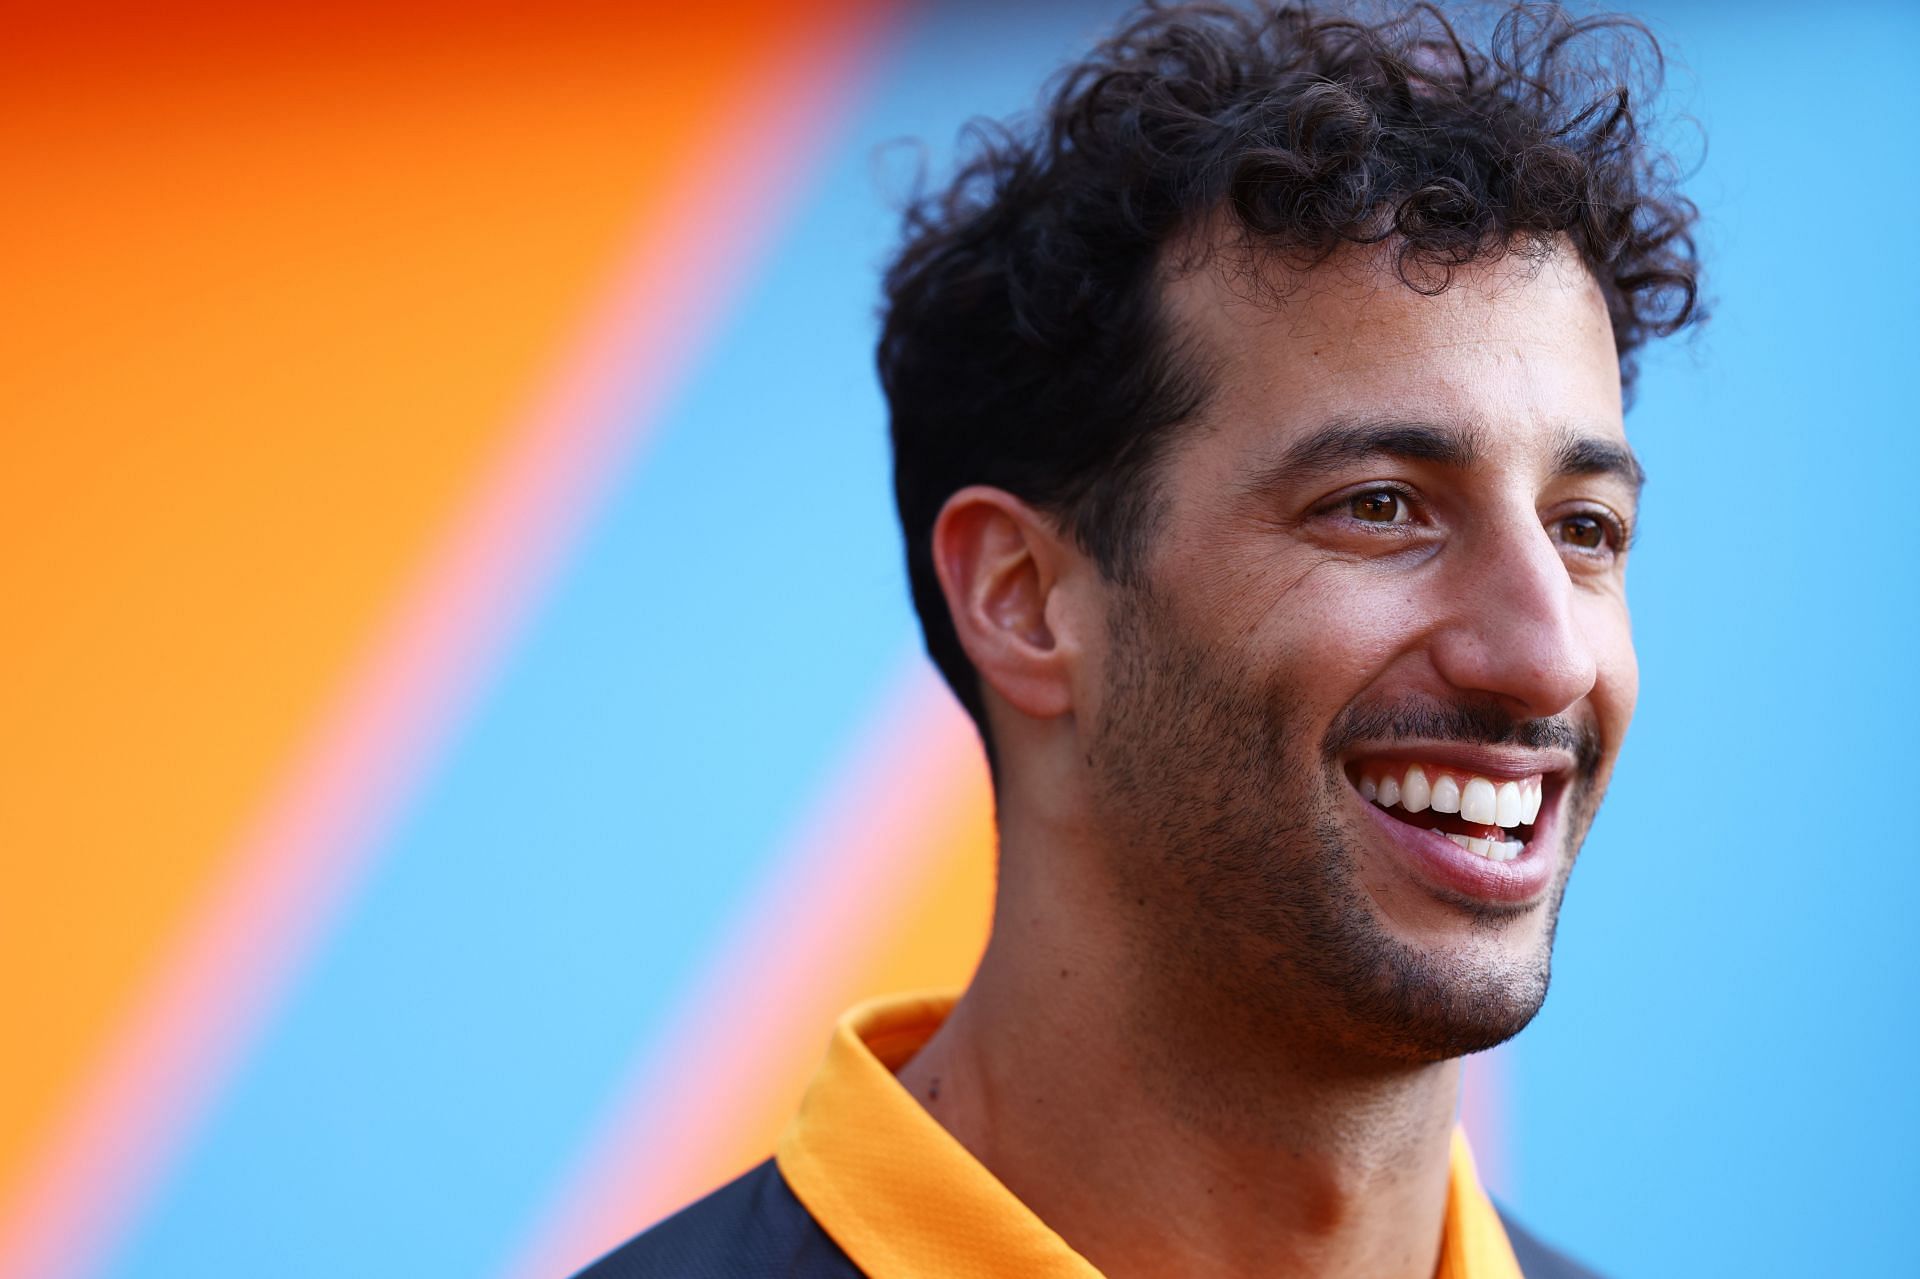 Daniel Ricciardo will be desperate for a strong result this weekend